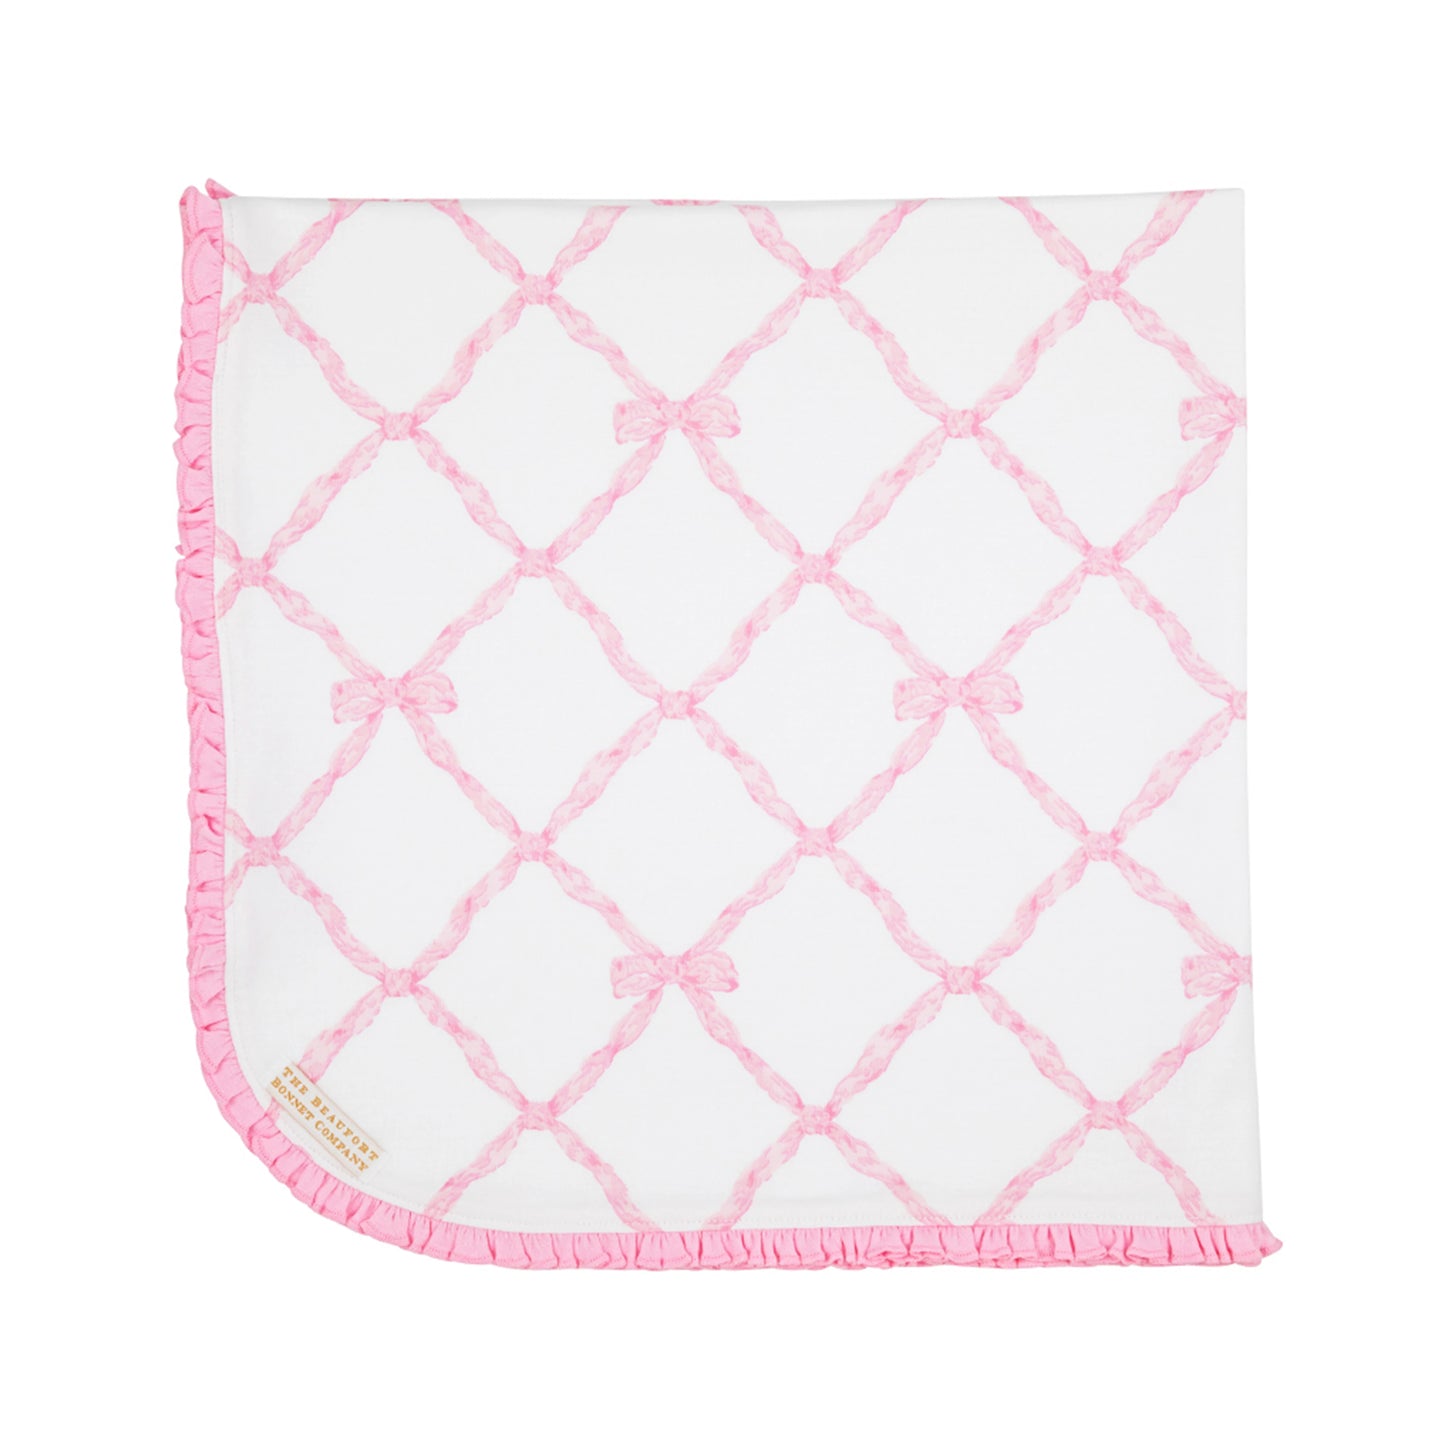 BABY BUGGY BLANKET - BELLE MEADE BOW/PIER PARTY PINK